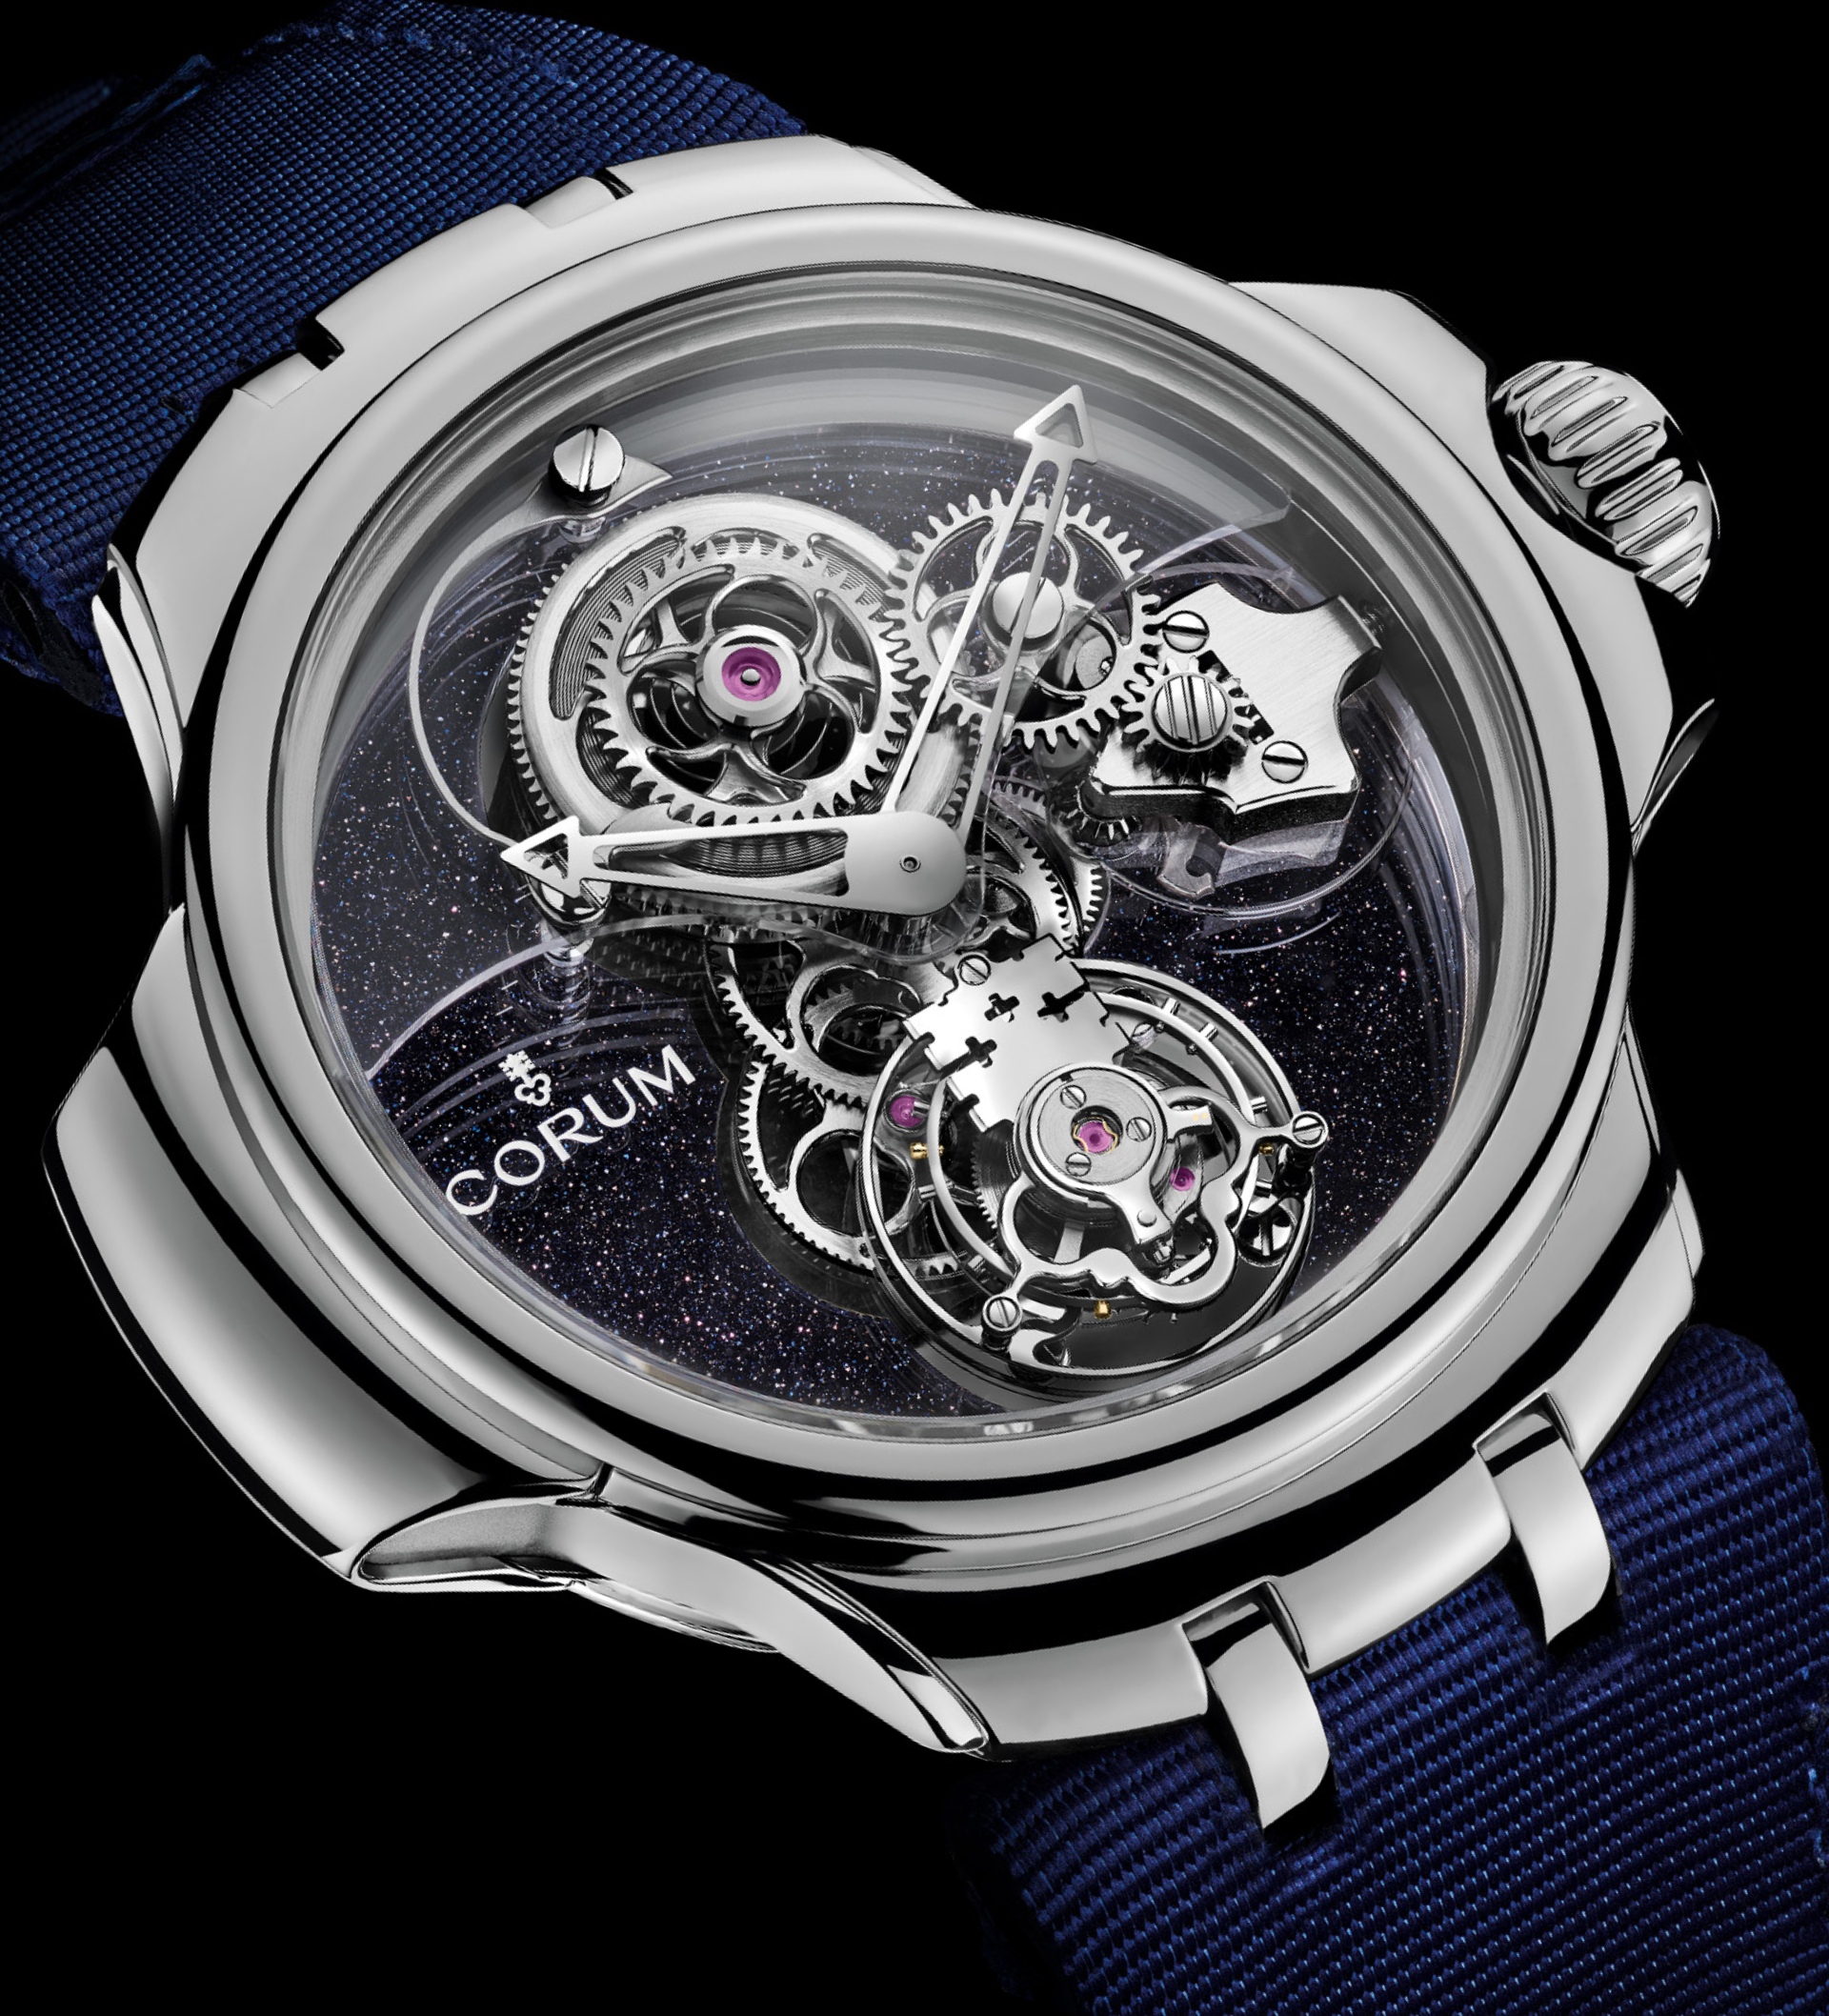 What is the frequency of the Flying Tourbillon beating inside the Concept Watch?